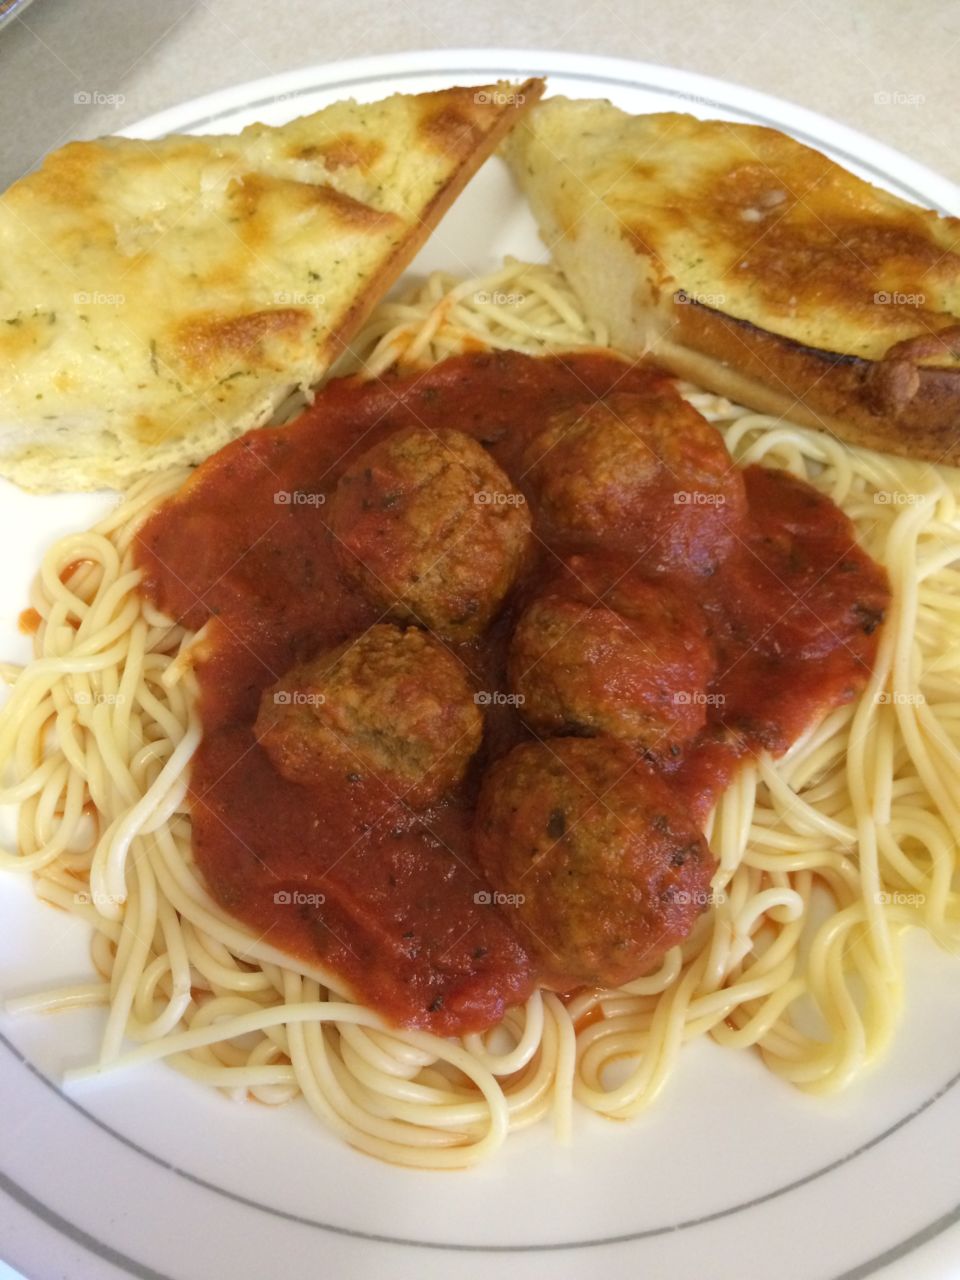 Dinner Time. Spaghetti and meatballs all time favorite. 